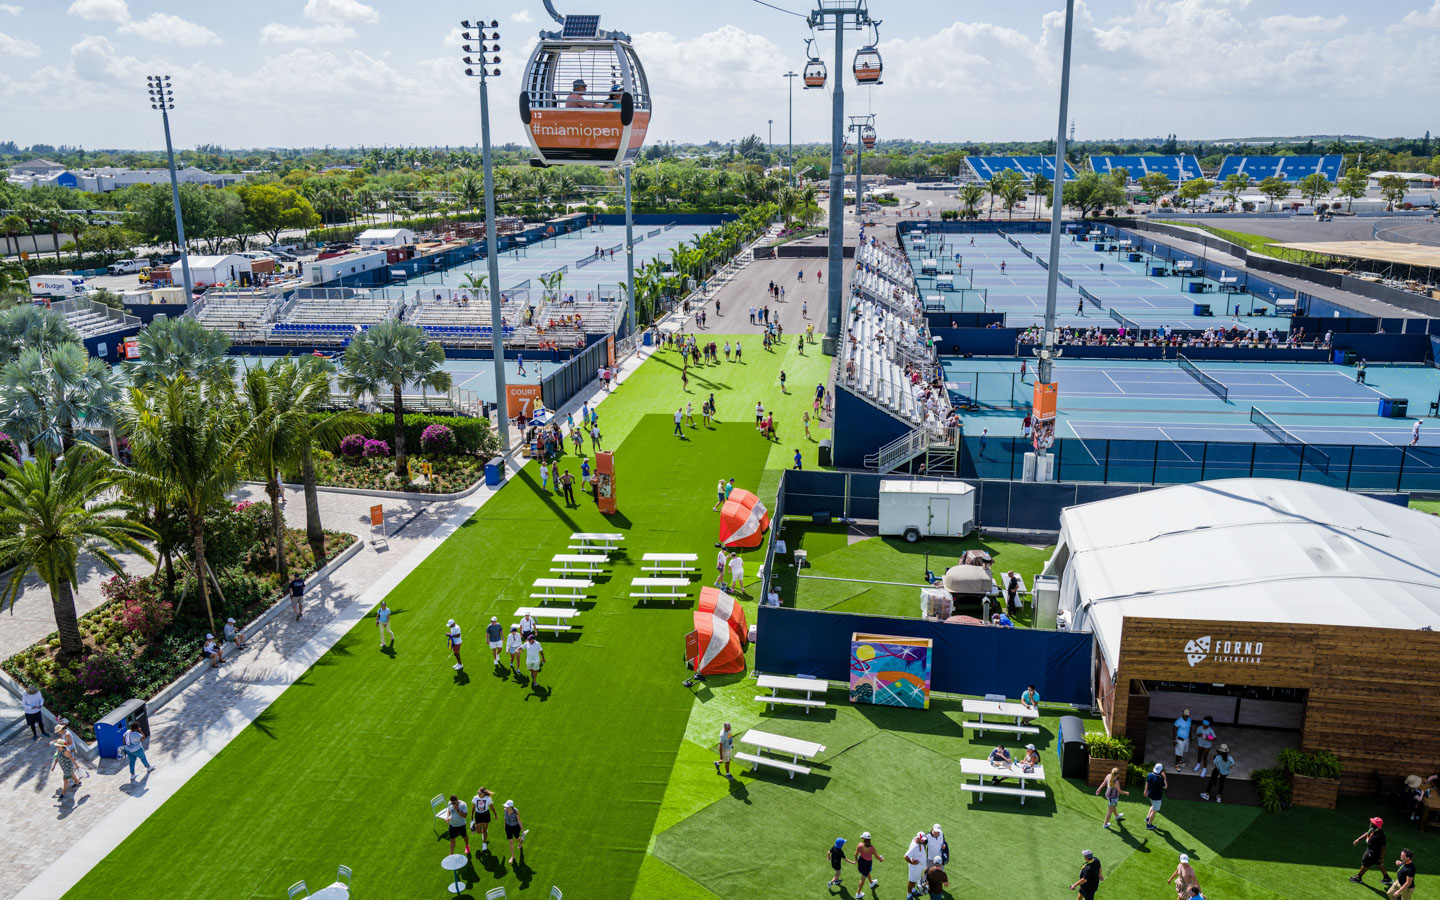 How to Watch: 2023 Miami Open  Tennis Schedule, Daily Matches and More -  Miami Open